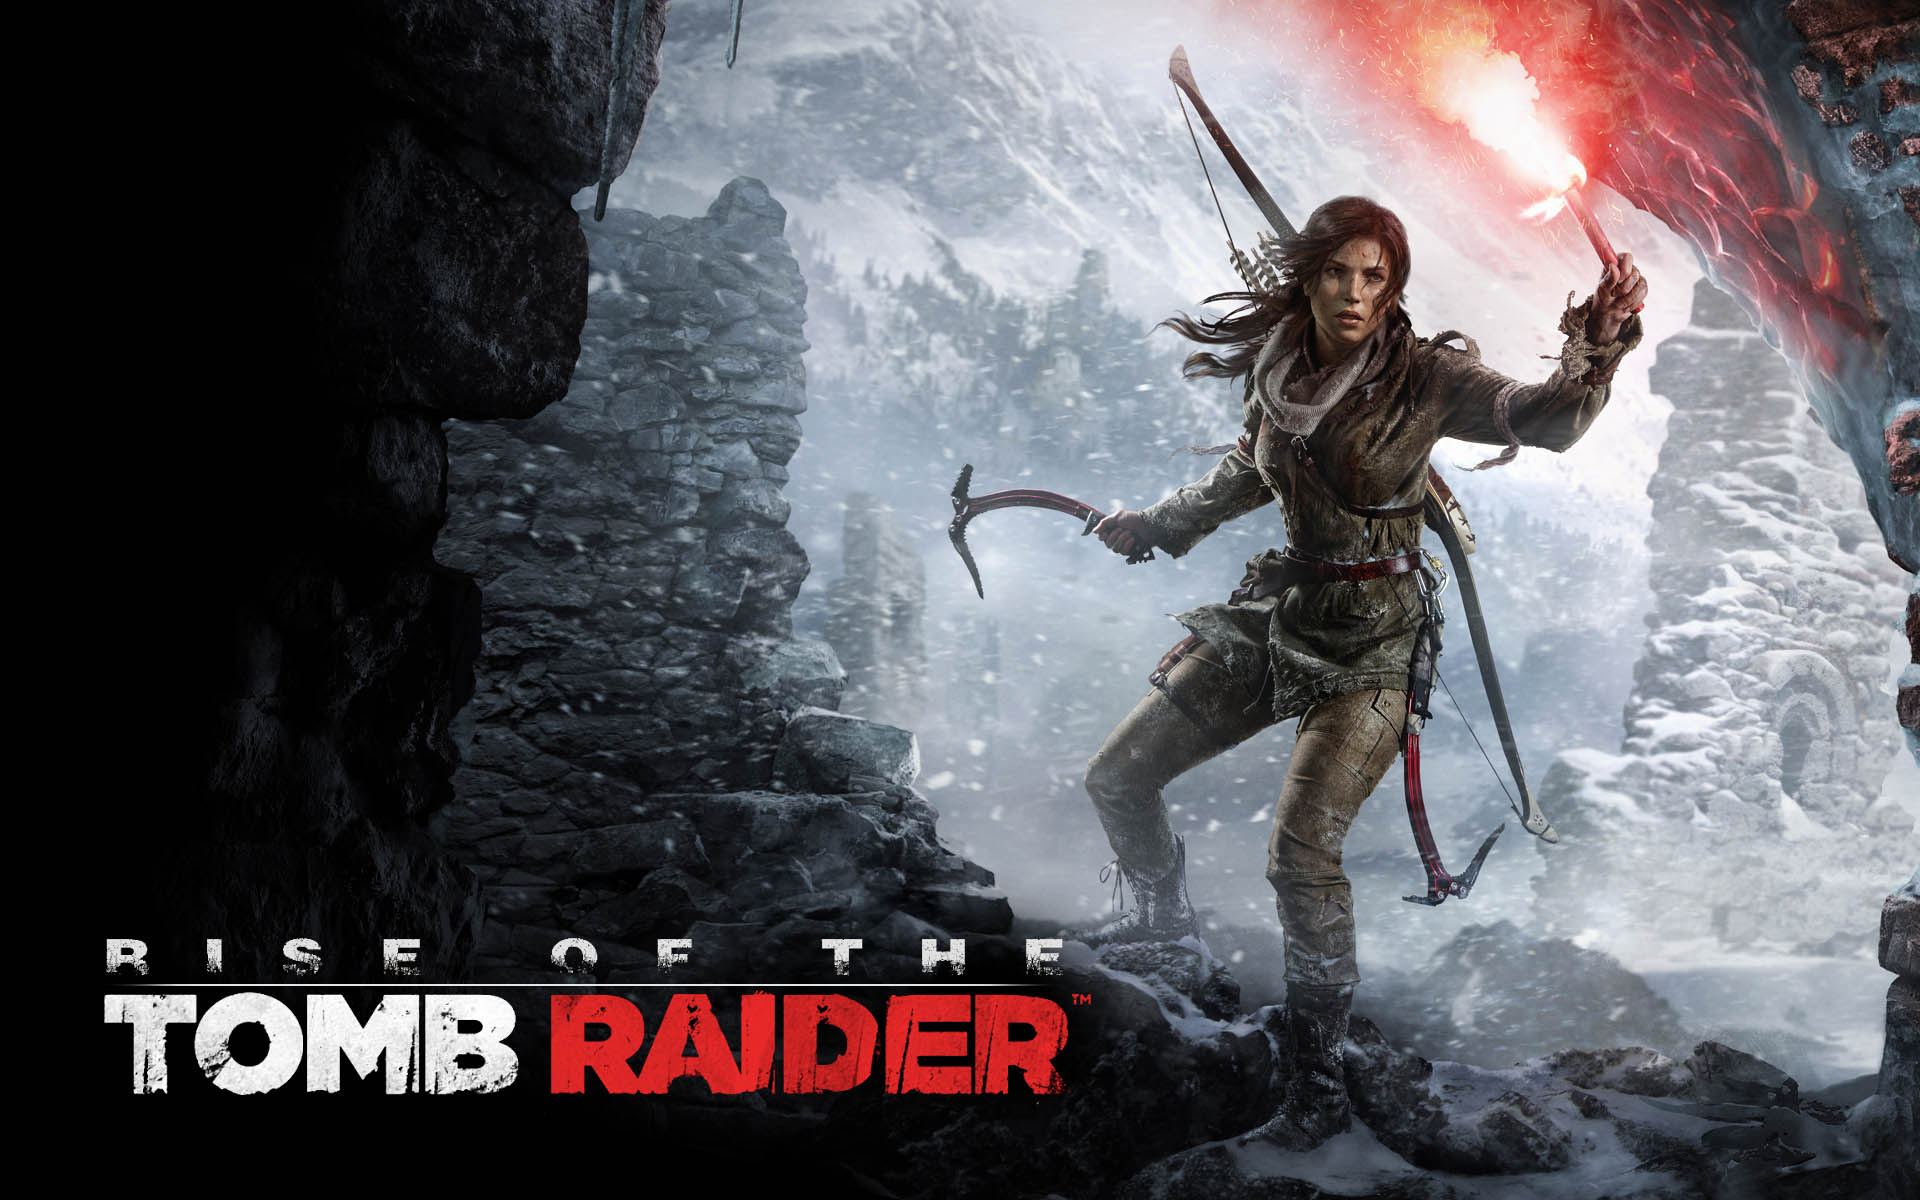 rise of the tomb raider INTEL CORE I9 9900K PROCESSOR REVIEW